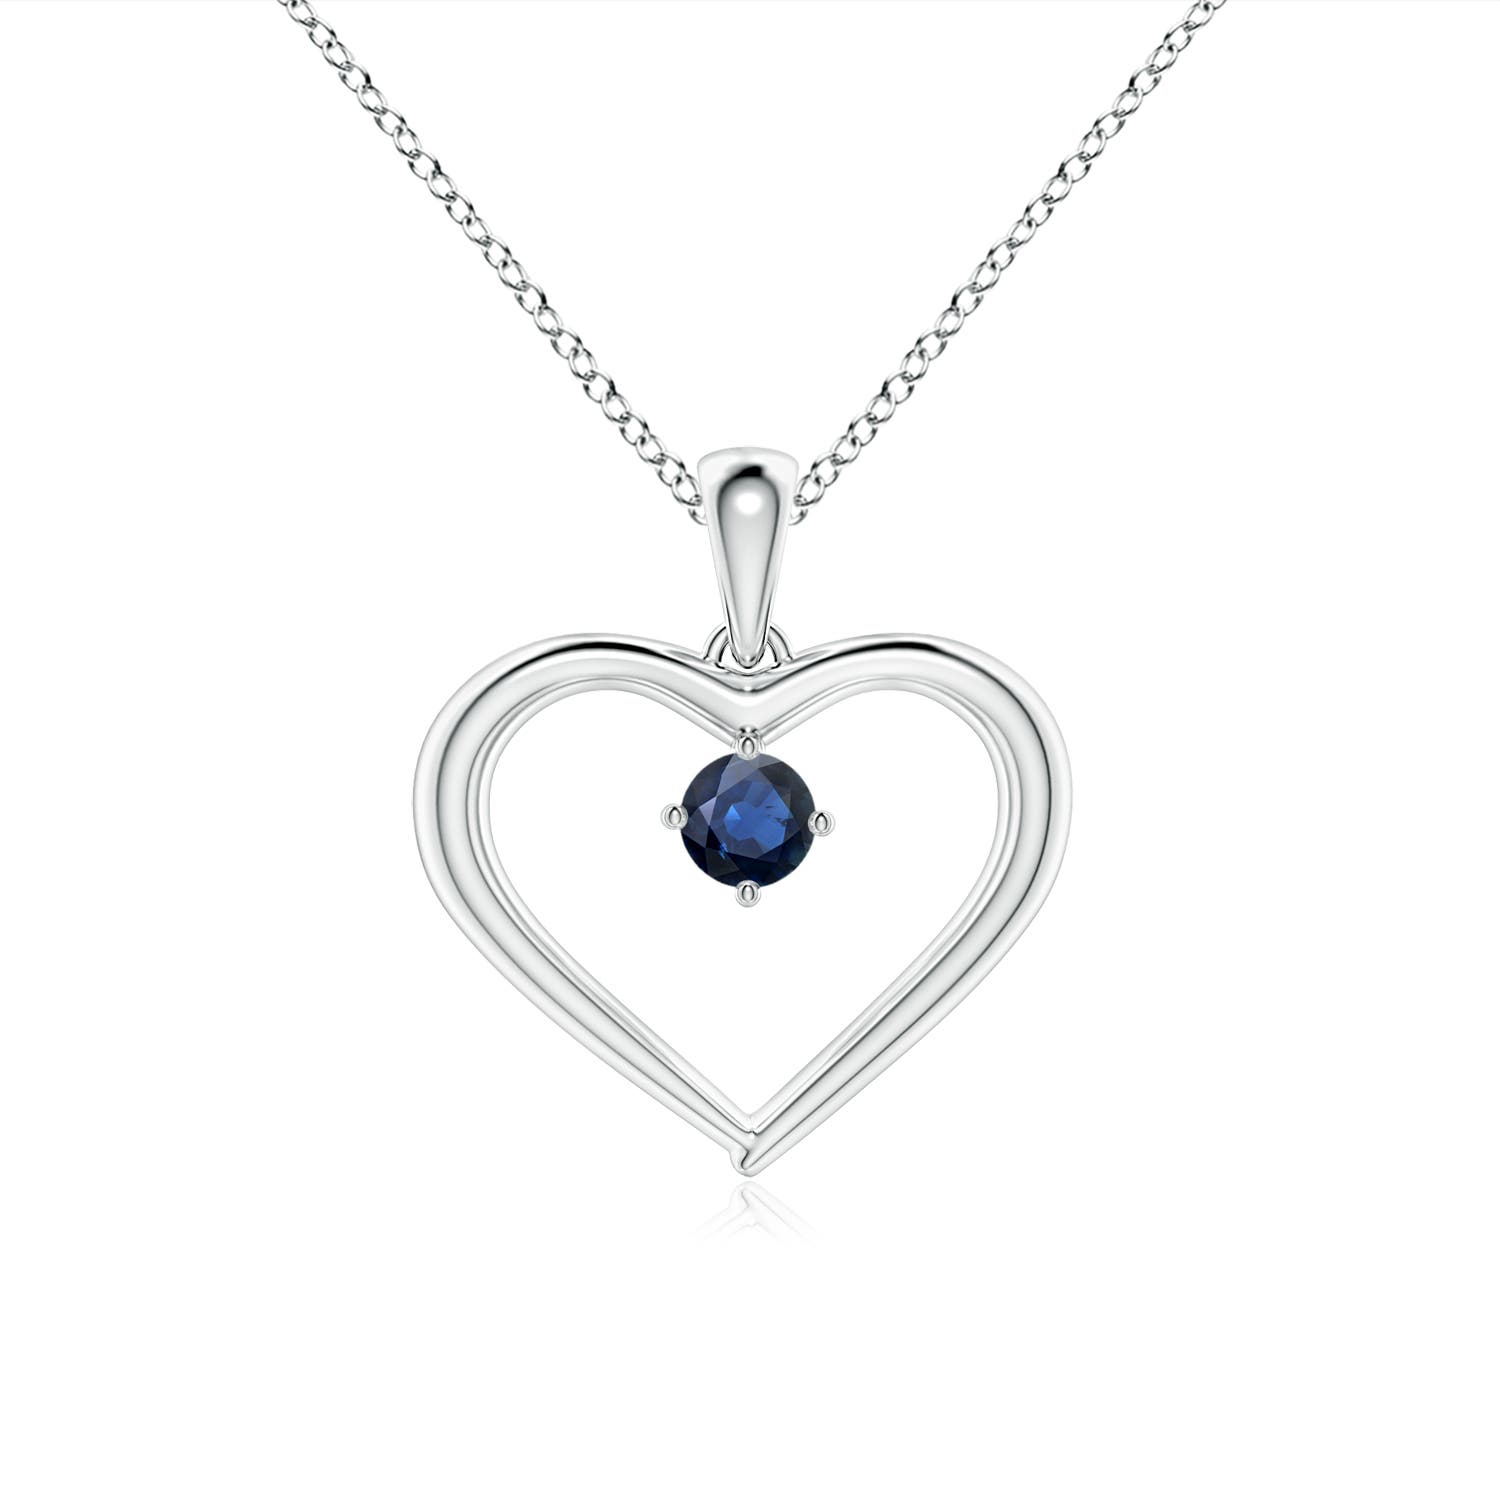 AA - Blue Sapphire / 0.14 CT / 14 KT White Gold